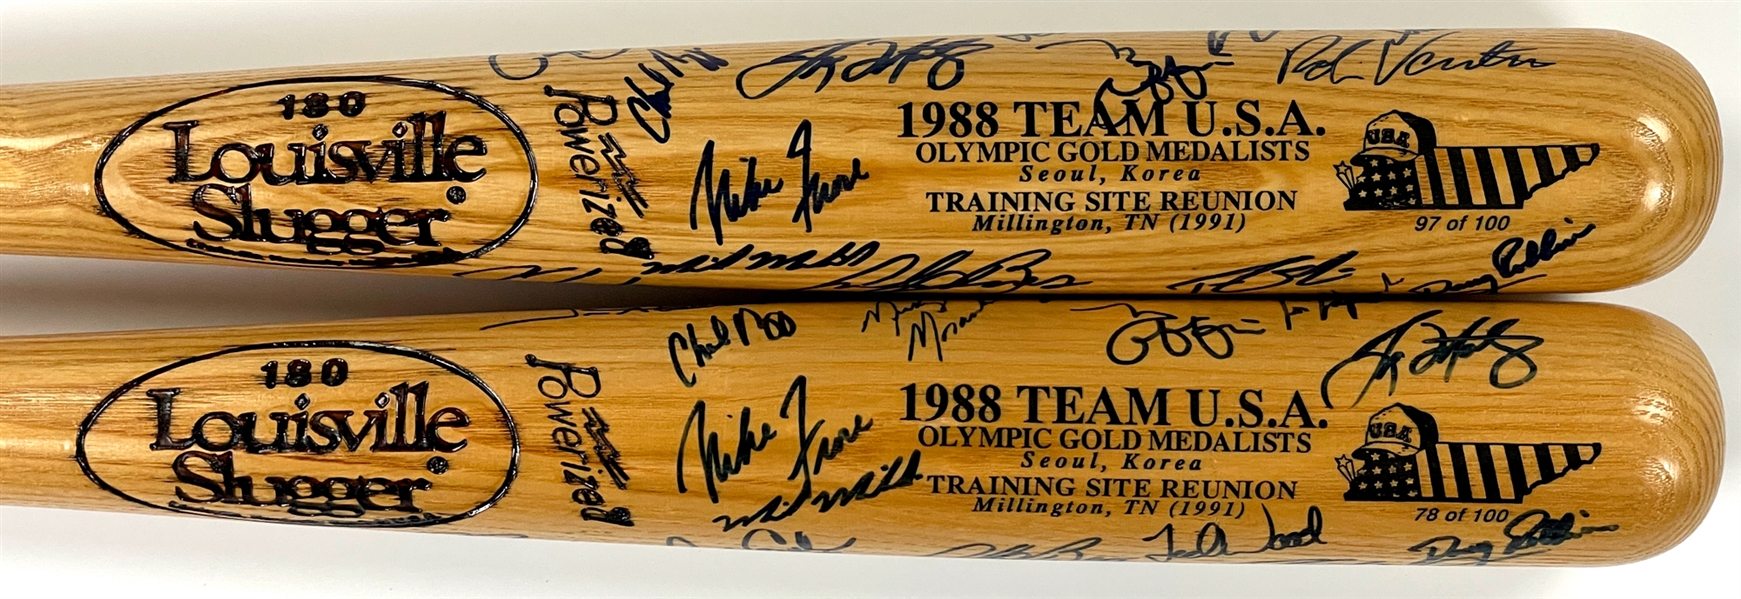 1988 USA Olympic Baseball Team Limited Edition Signed Bats (2) and Photo (BAS)